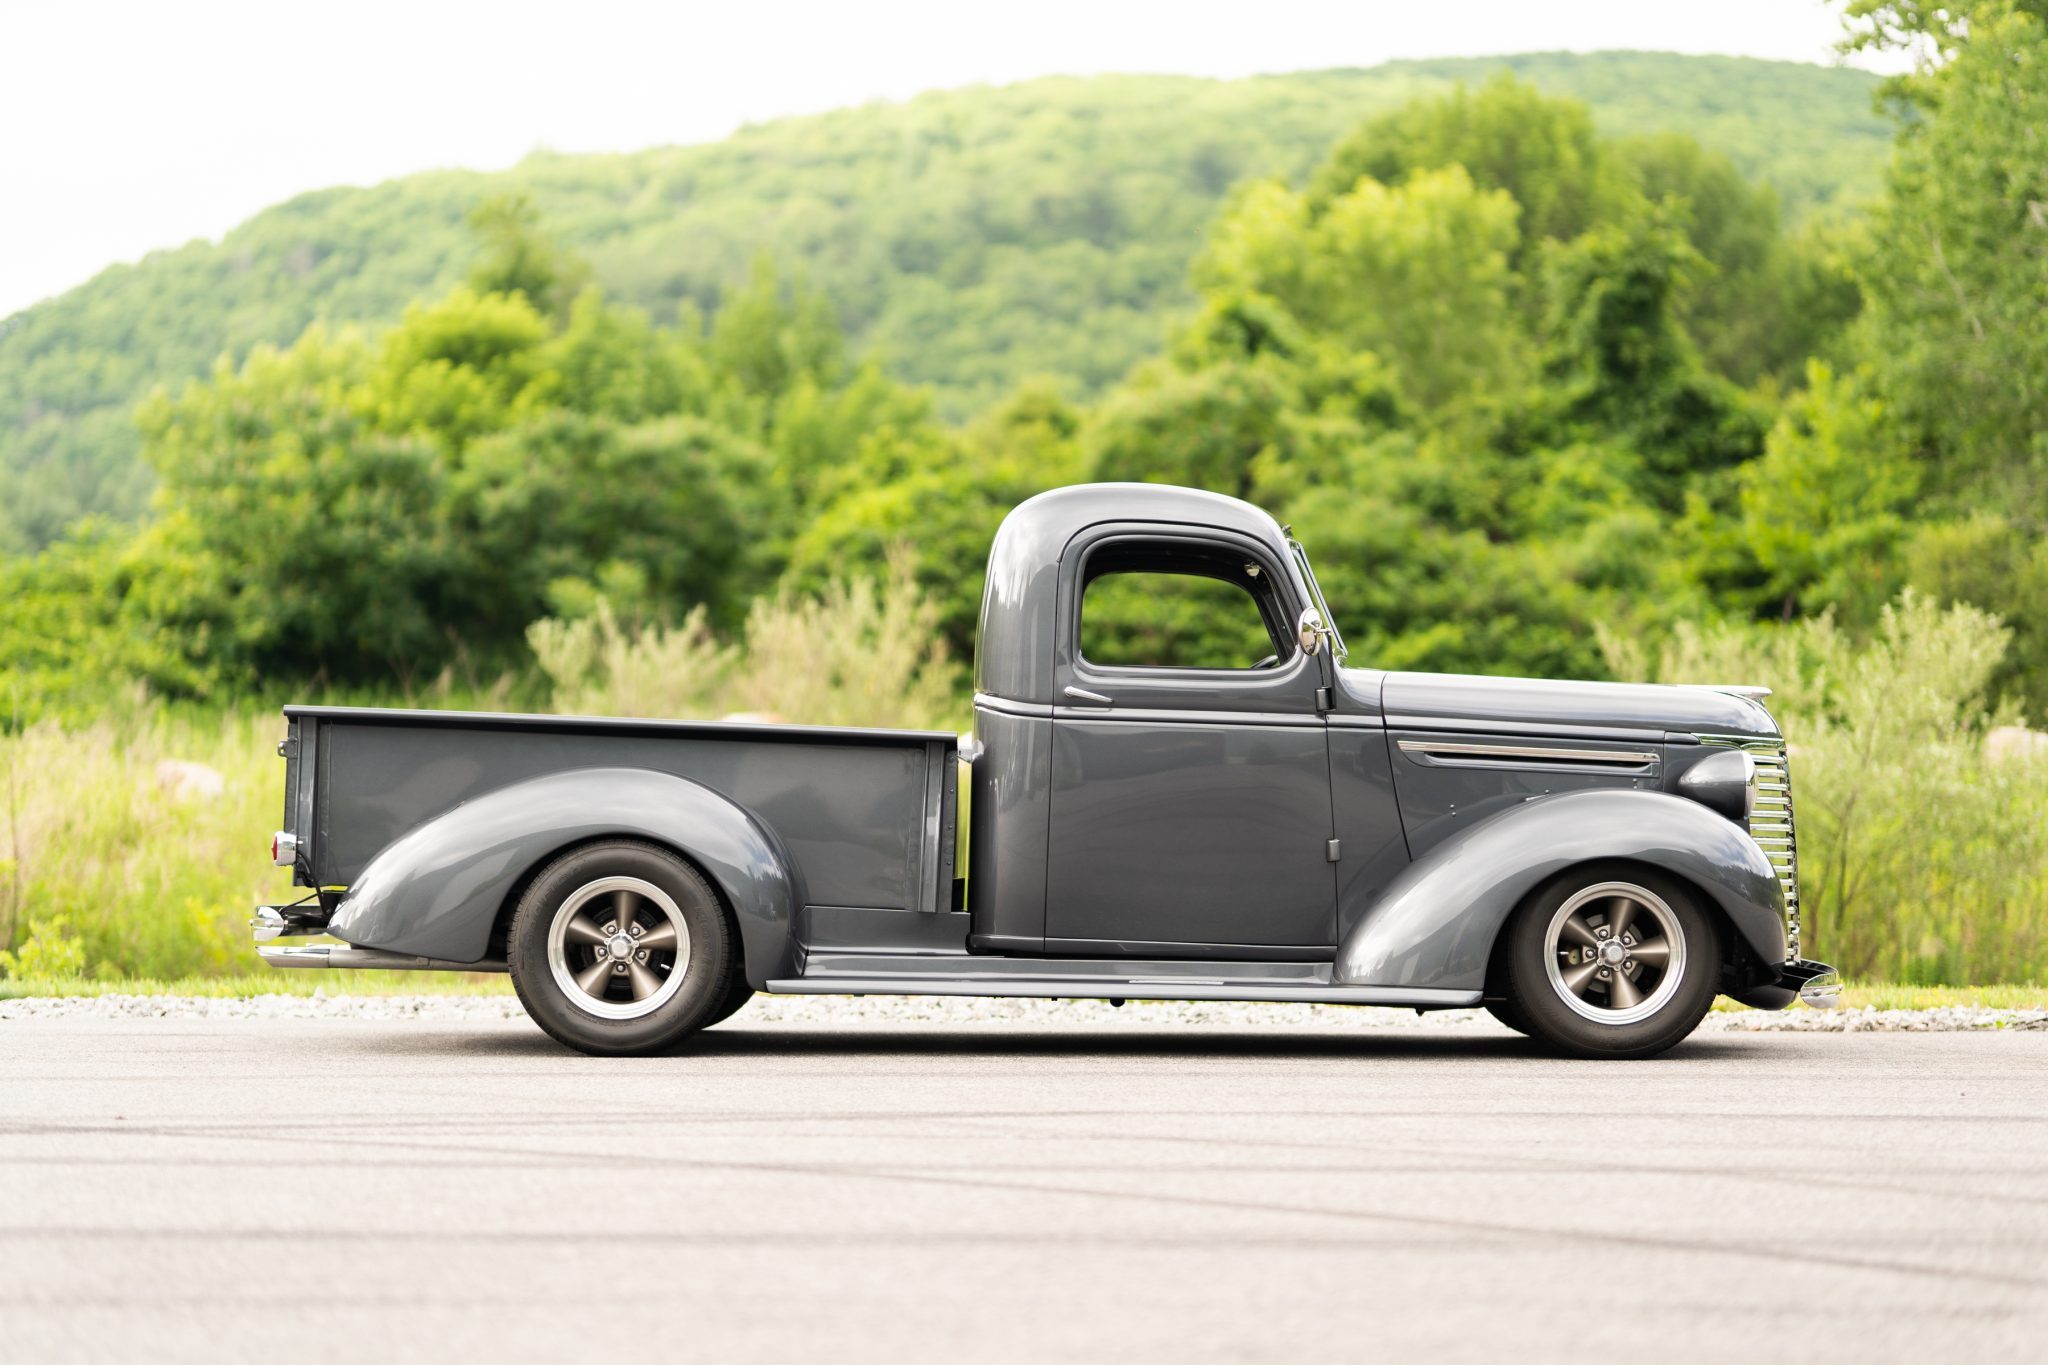 1939 Chevrolet Pickup Picture